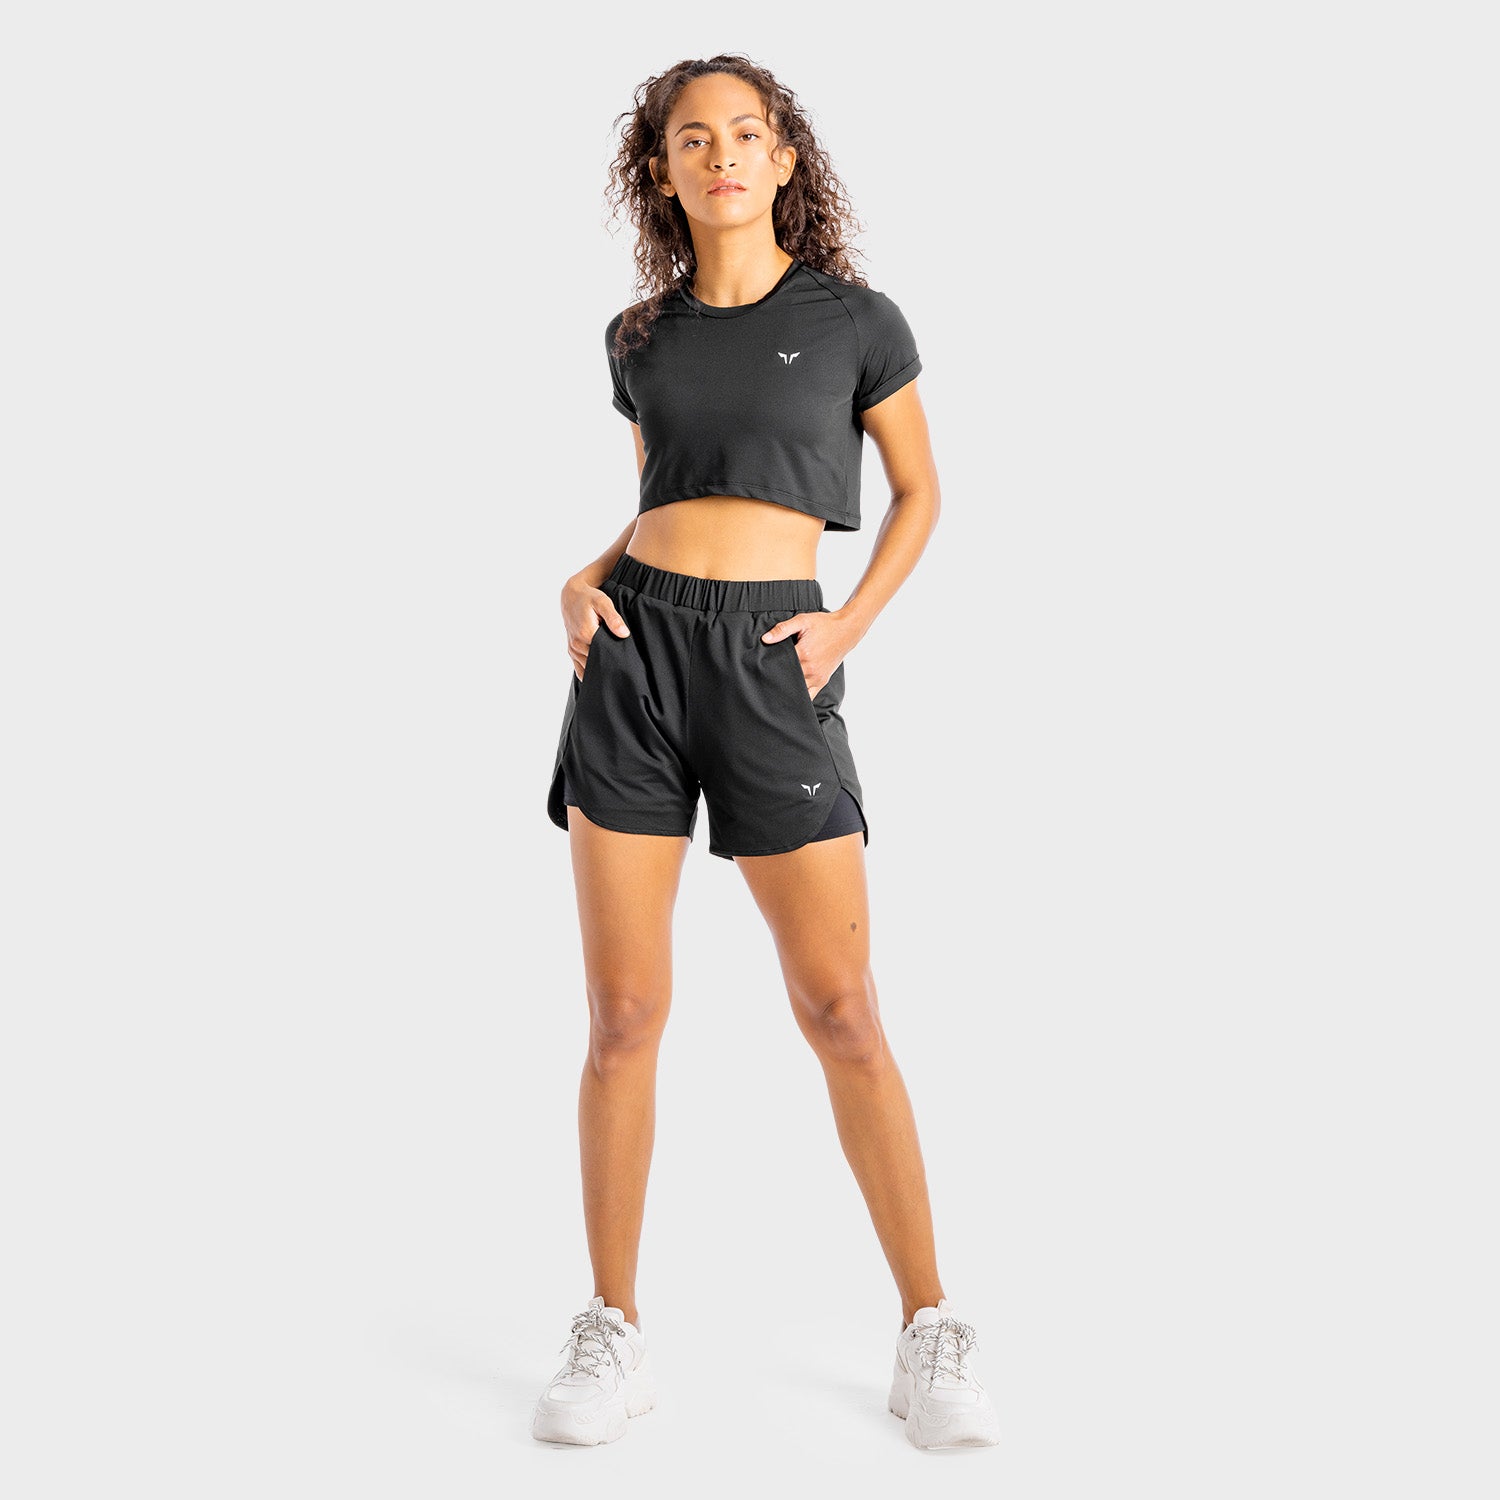 squatwolf-workout-clothes-core-2-in-1-shorts-black-gym-shorts-for-women